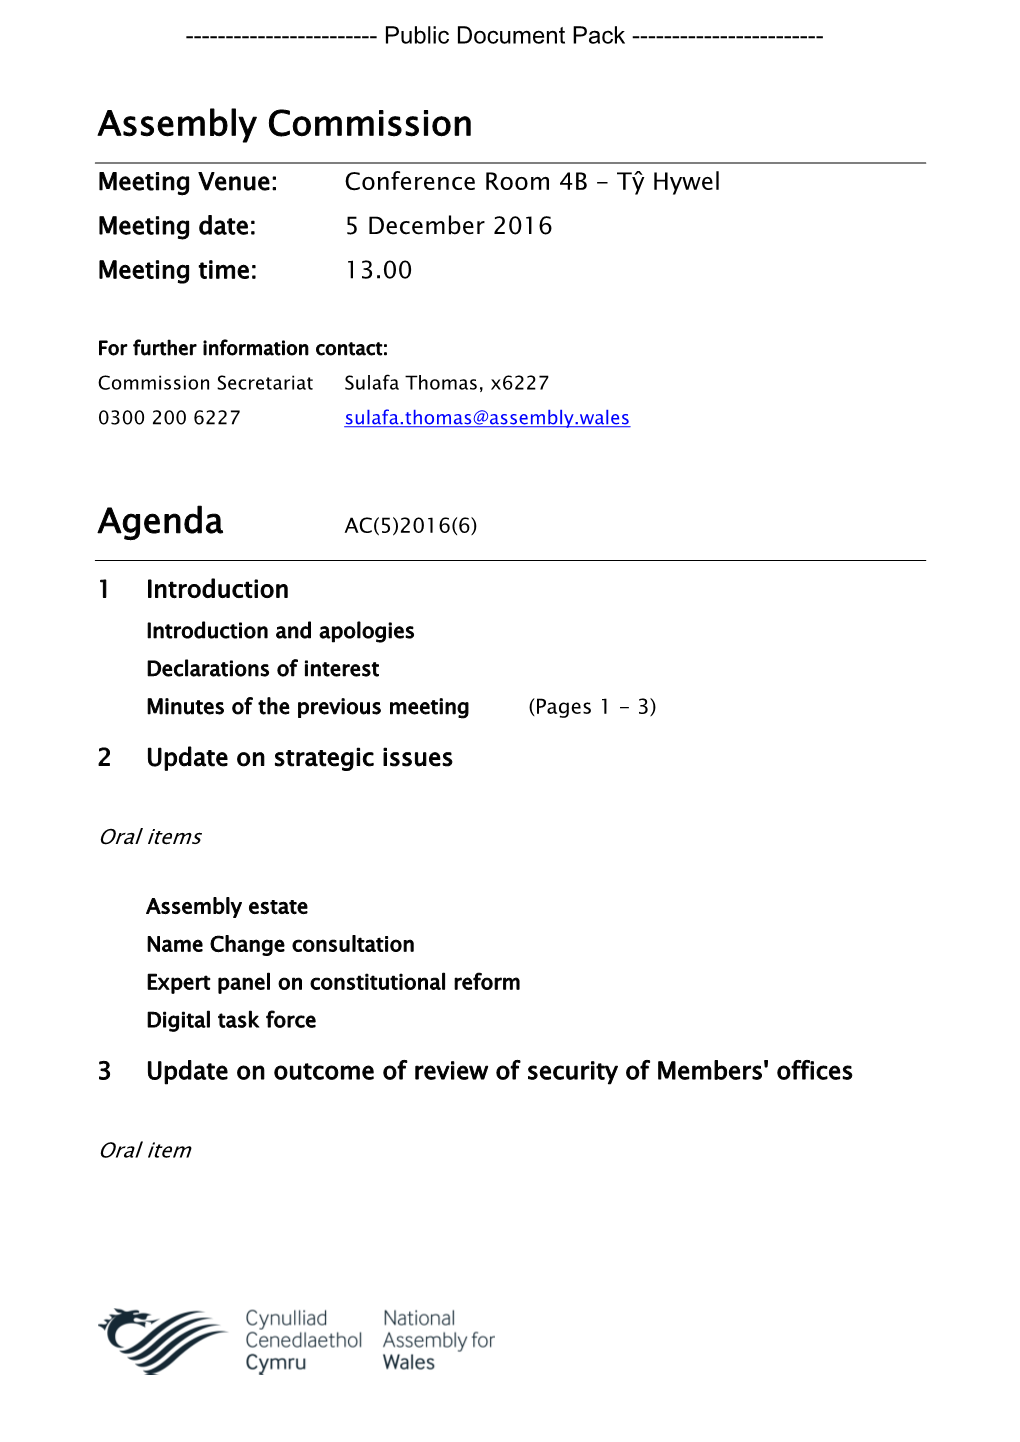 (Public Pack)Agenda Document for Assembly